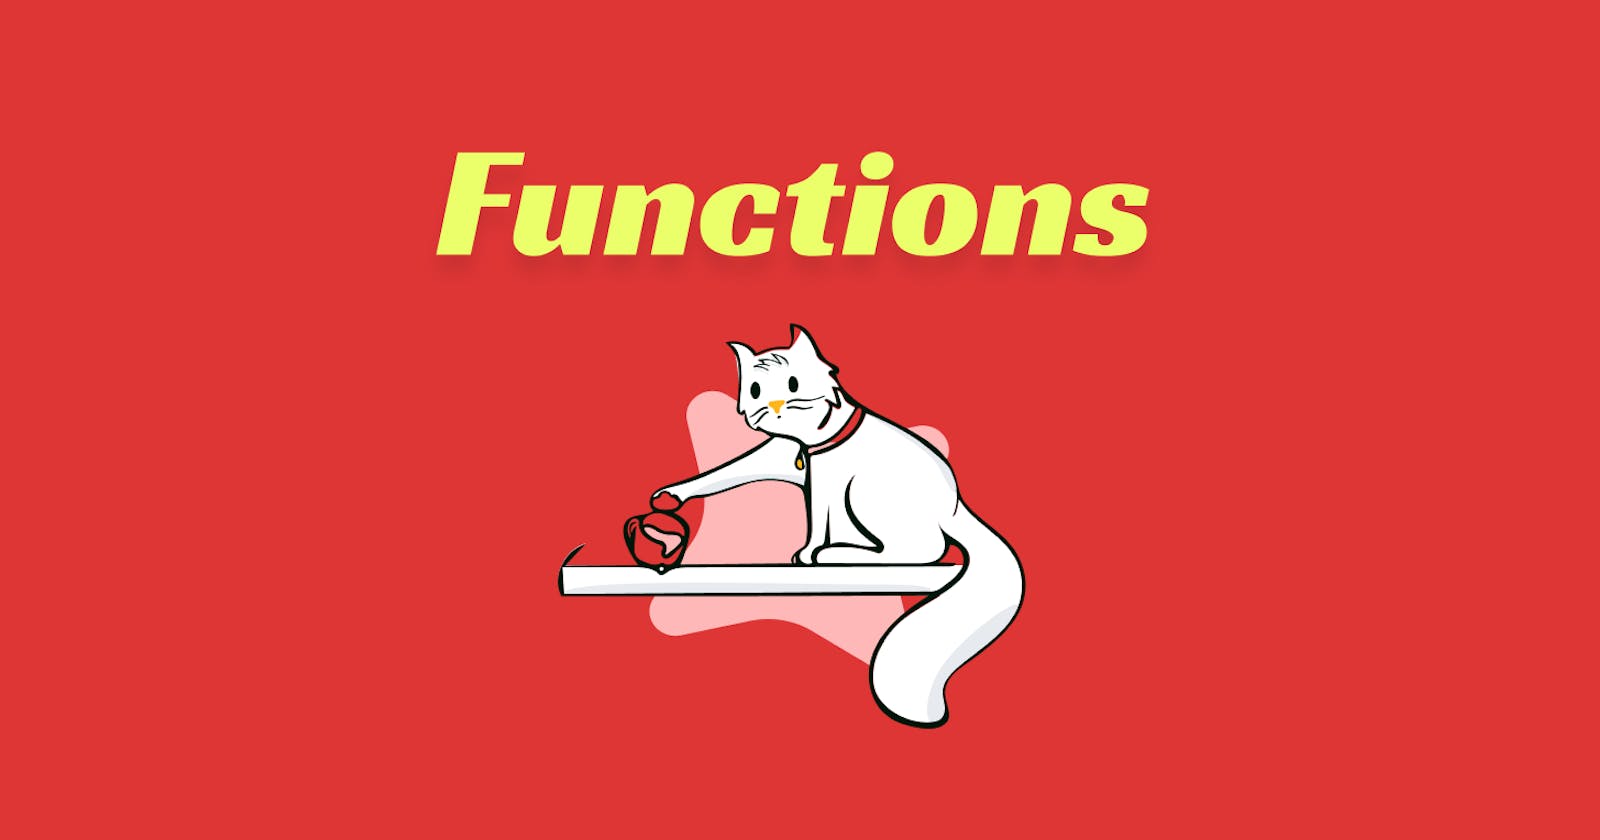 Fun with Functions